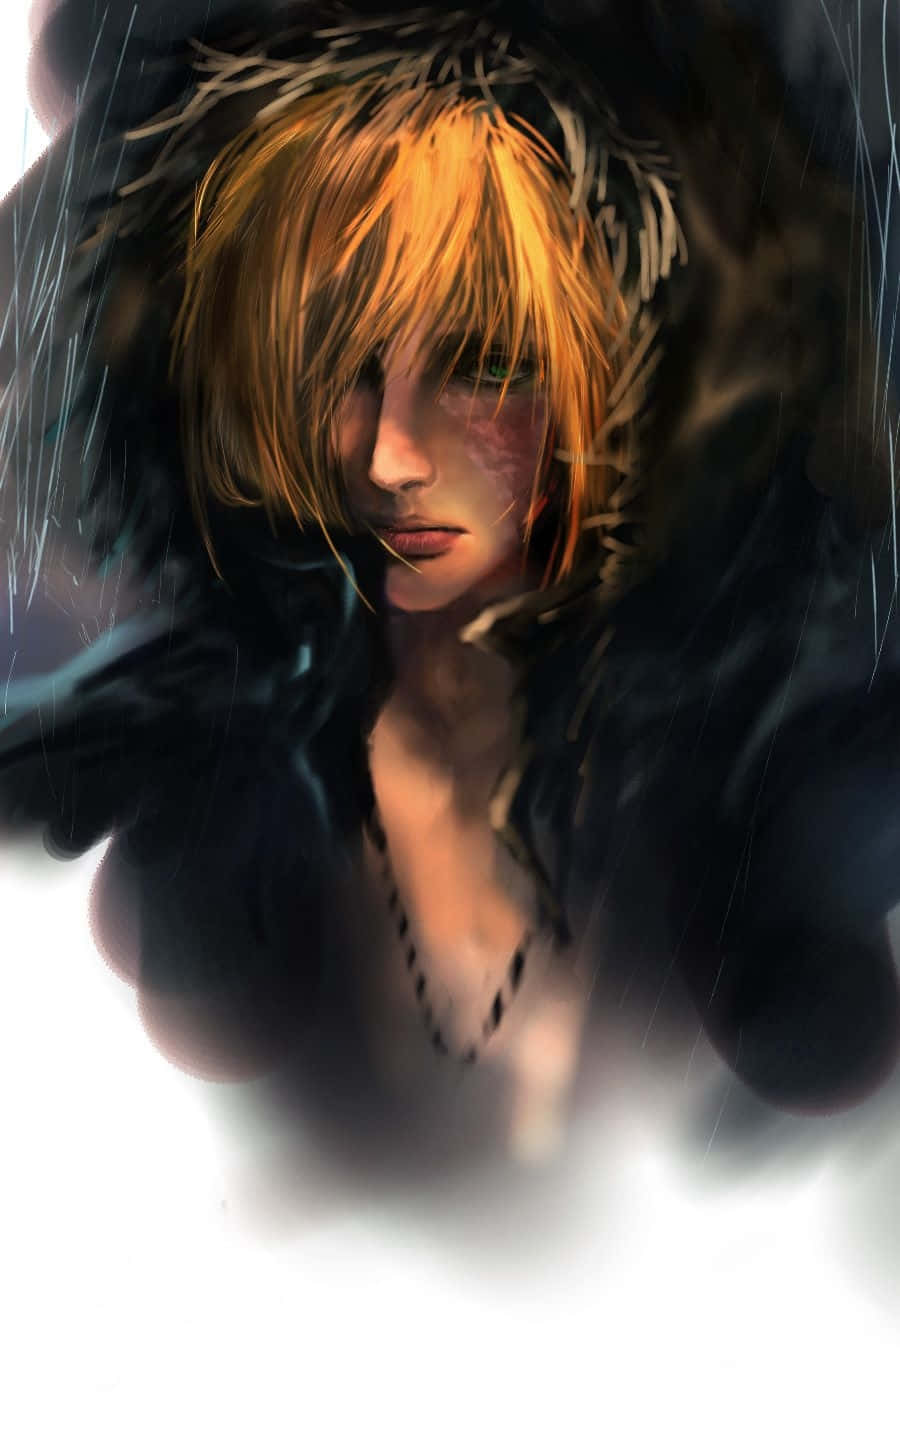 Mello from Death Note deep in thought Wallpaper